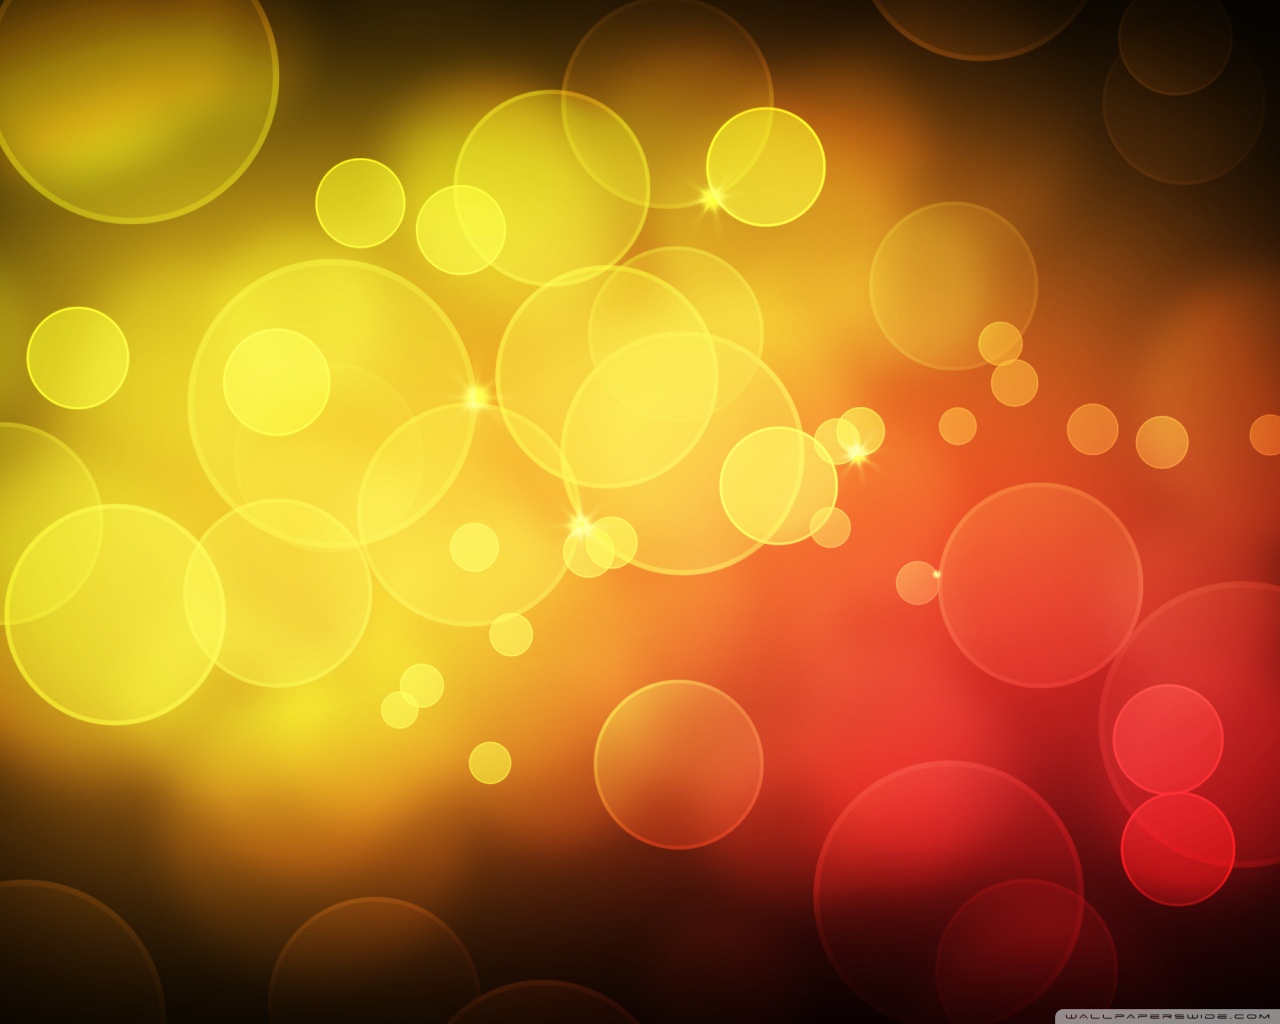 Nice Images Collection: Yellow Red Desktop Wallpapers